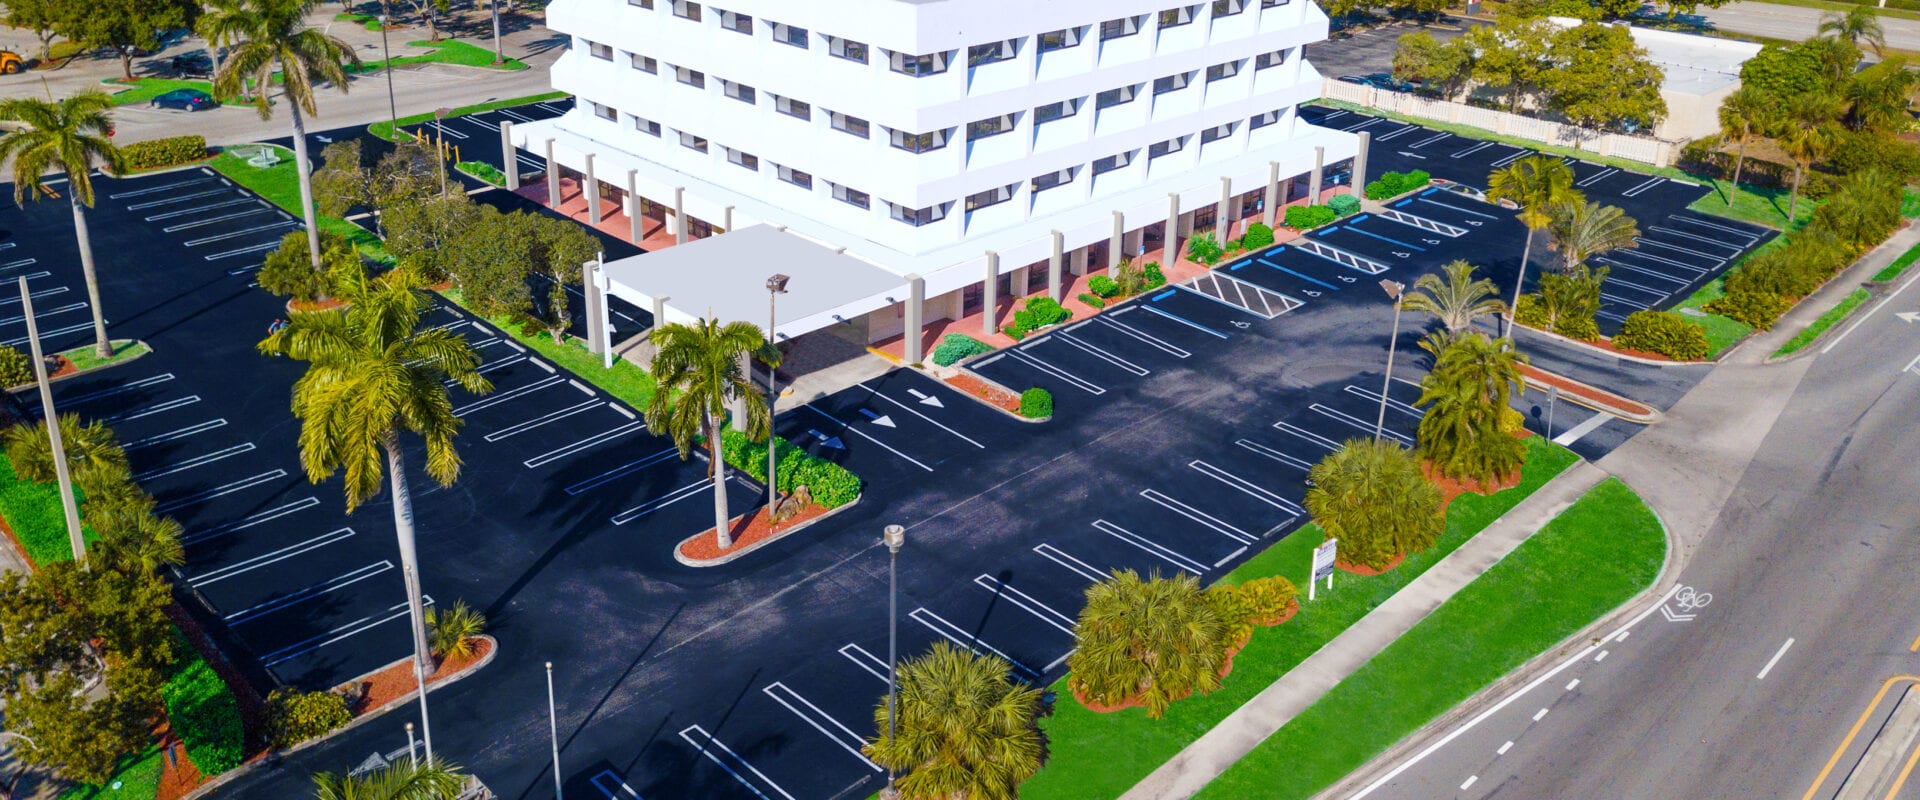 For Lease Office Space Pompano Beach 232 SF